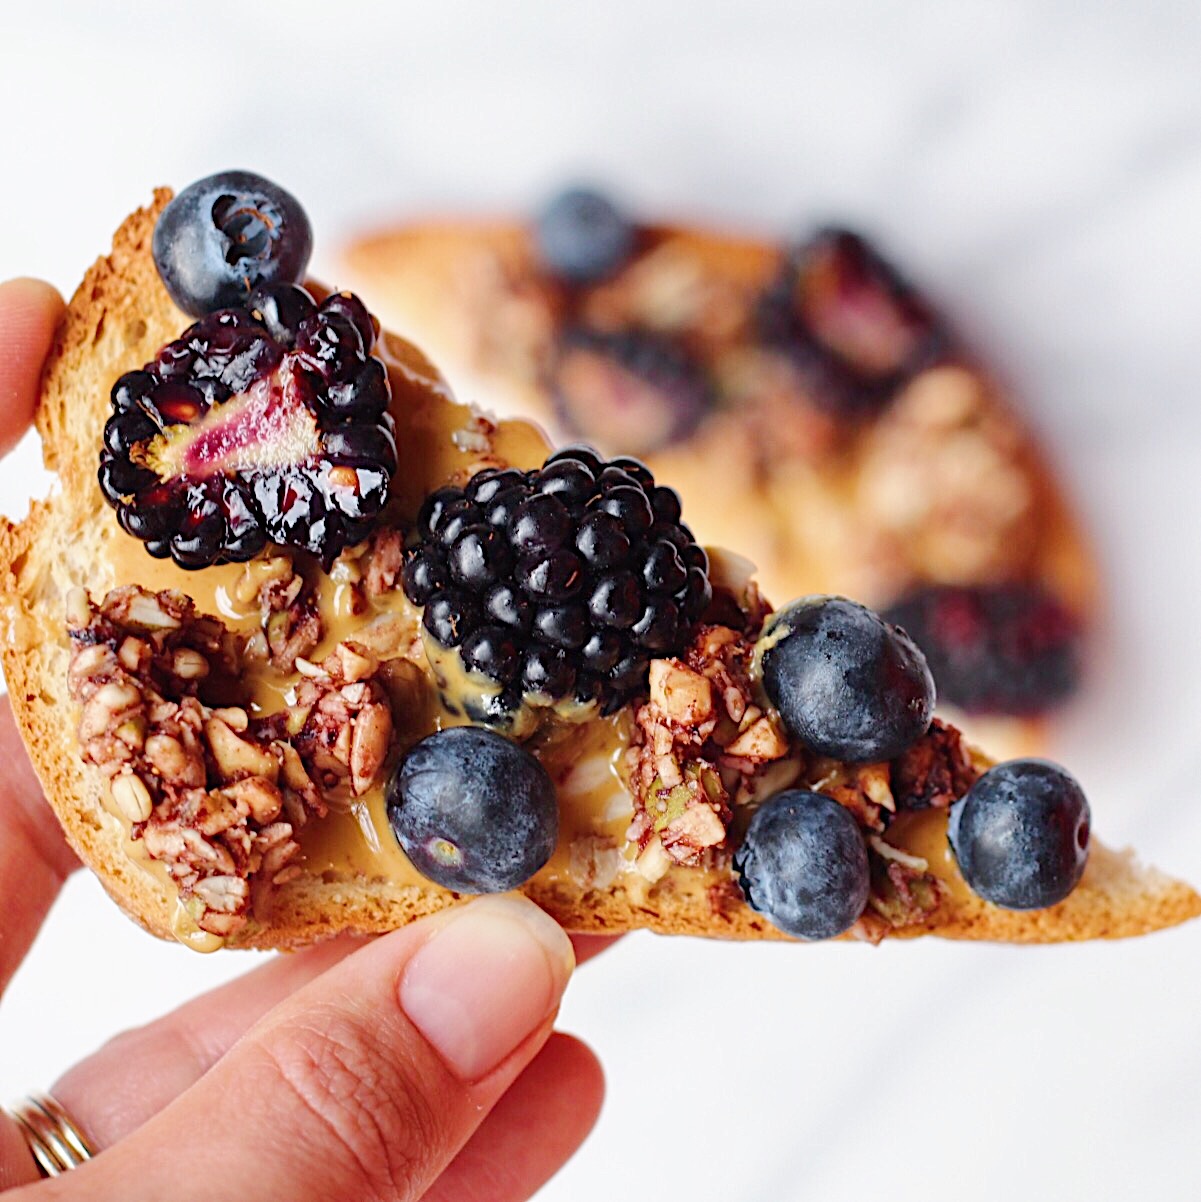  Pictured:  Berry and Nut Butter Toast  